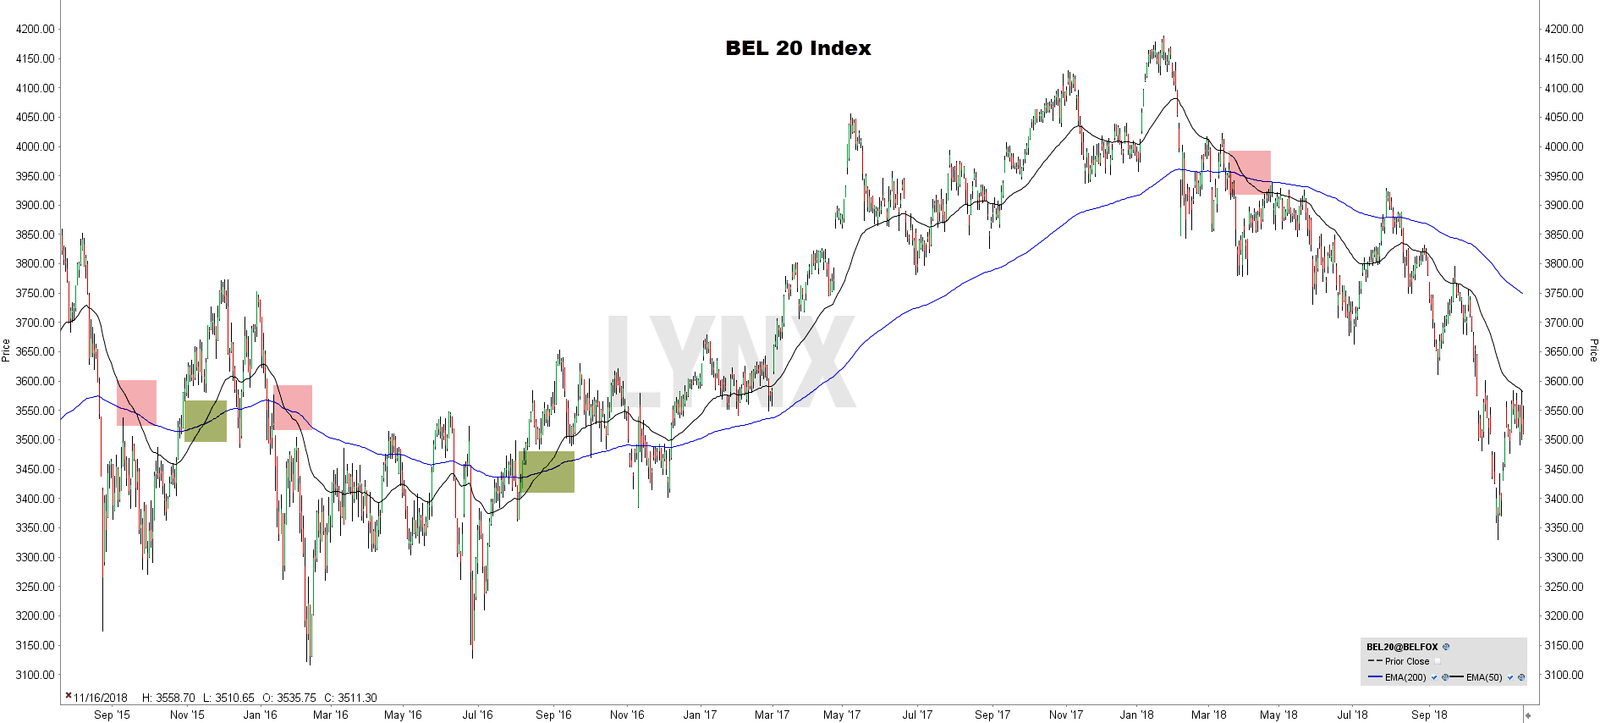 Moving average crossover bel 20 - MA Crossover